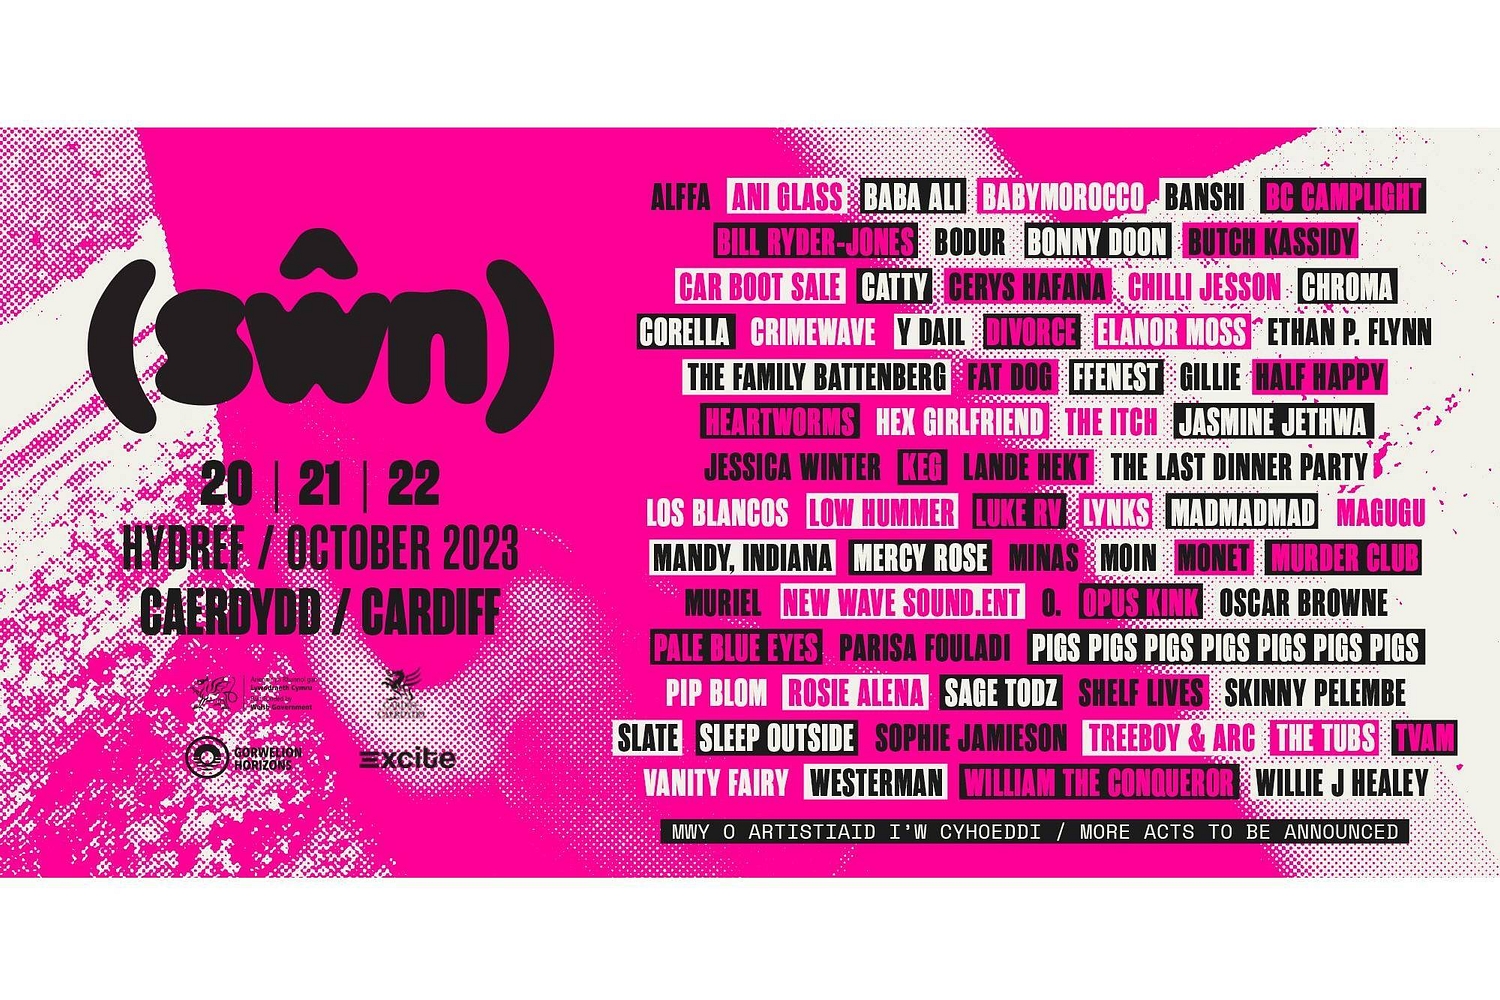 Cardiff’s Swn Festival announces next wave of artists for 2023